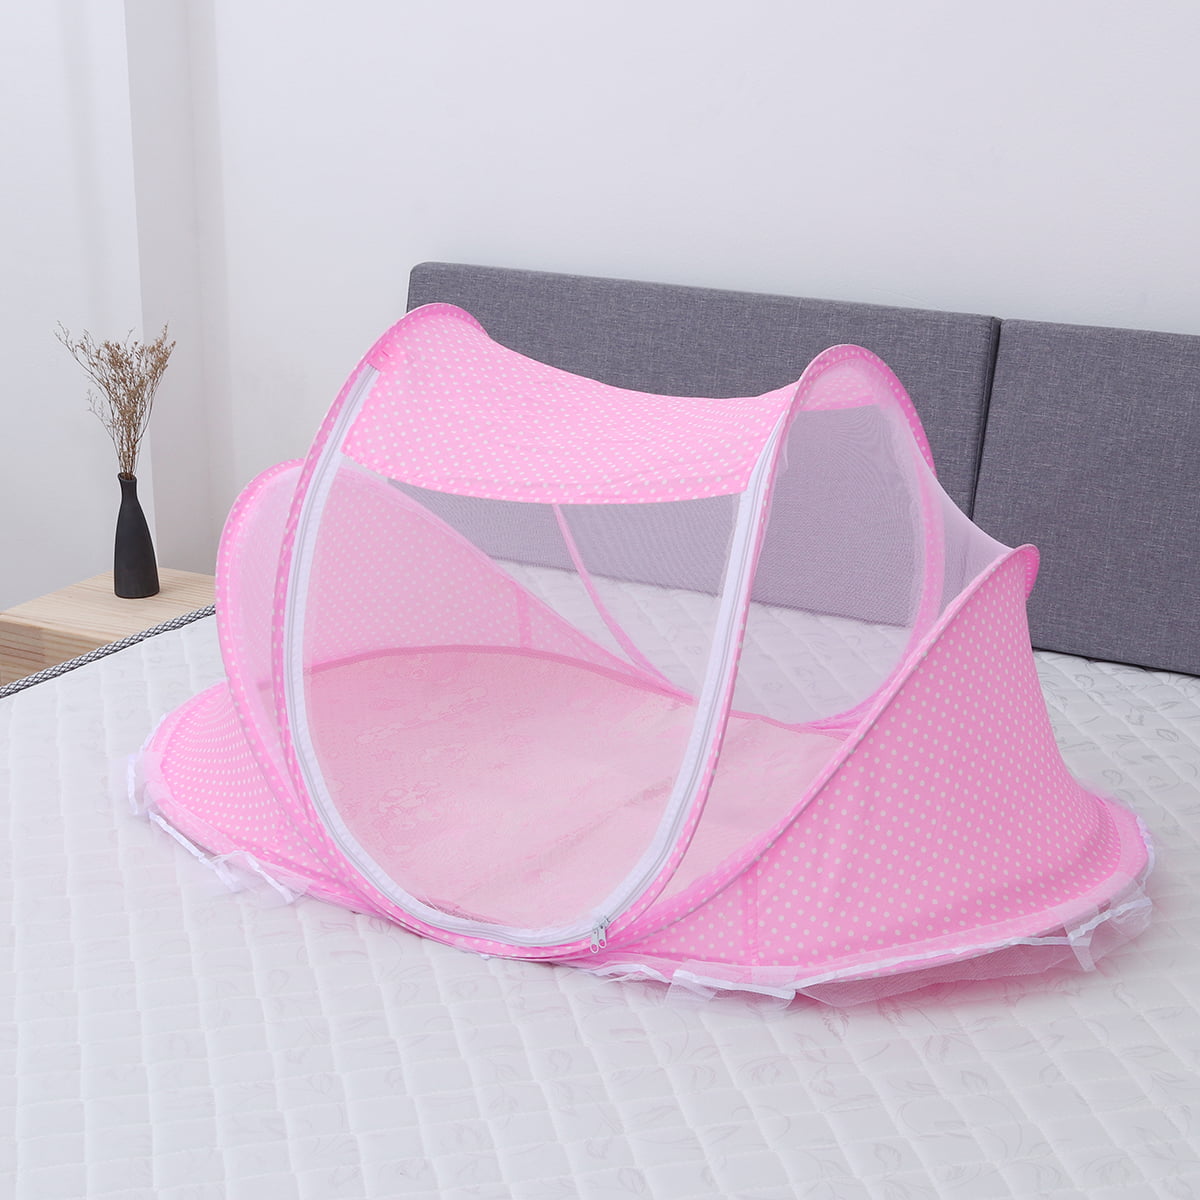 Portable Baby Crib Mosquito Net for Infants Breathable Foldable Cradle Bed Pink 